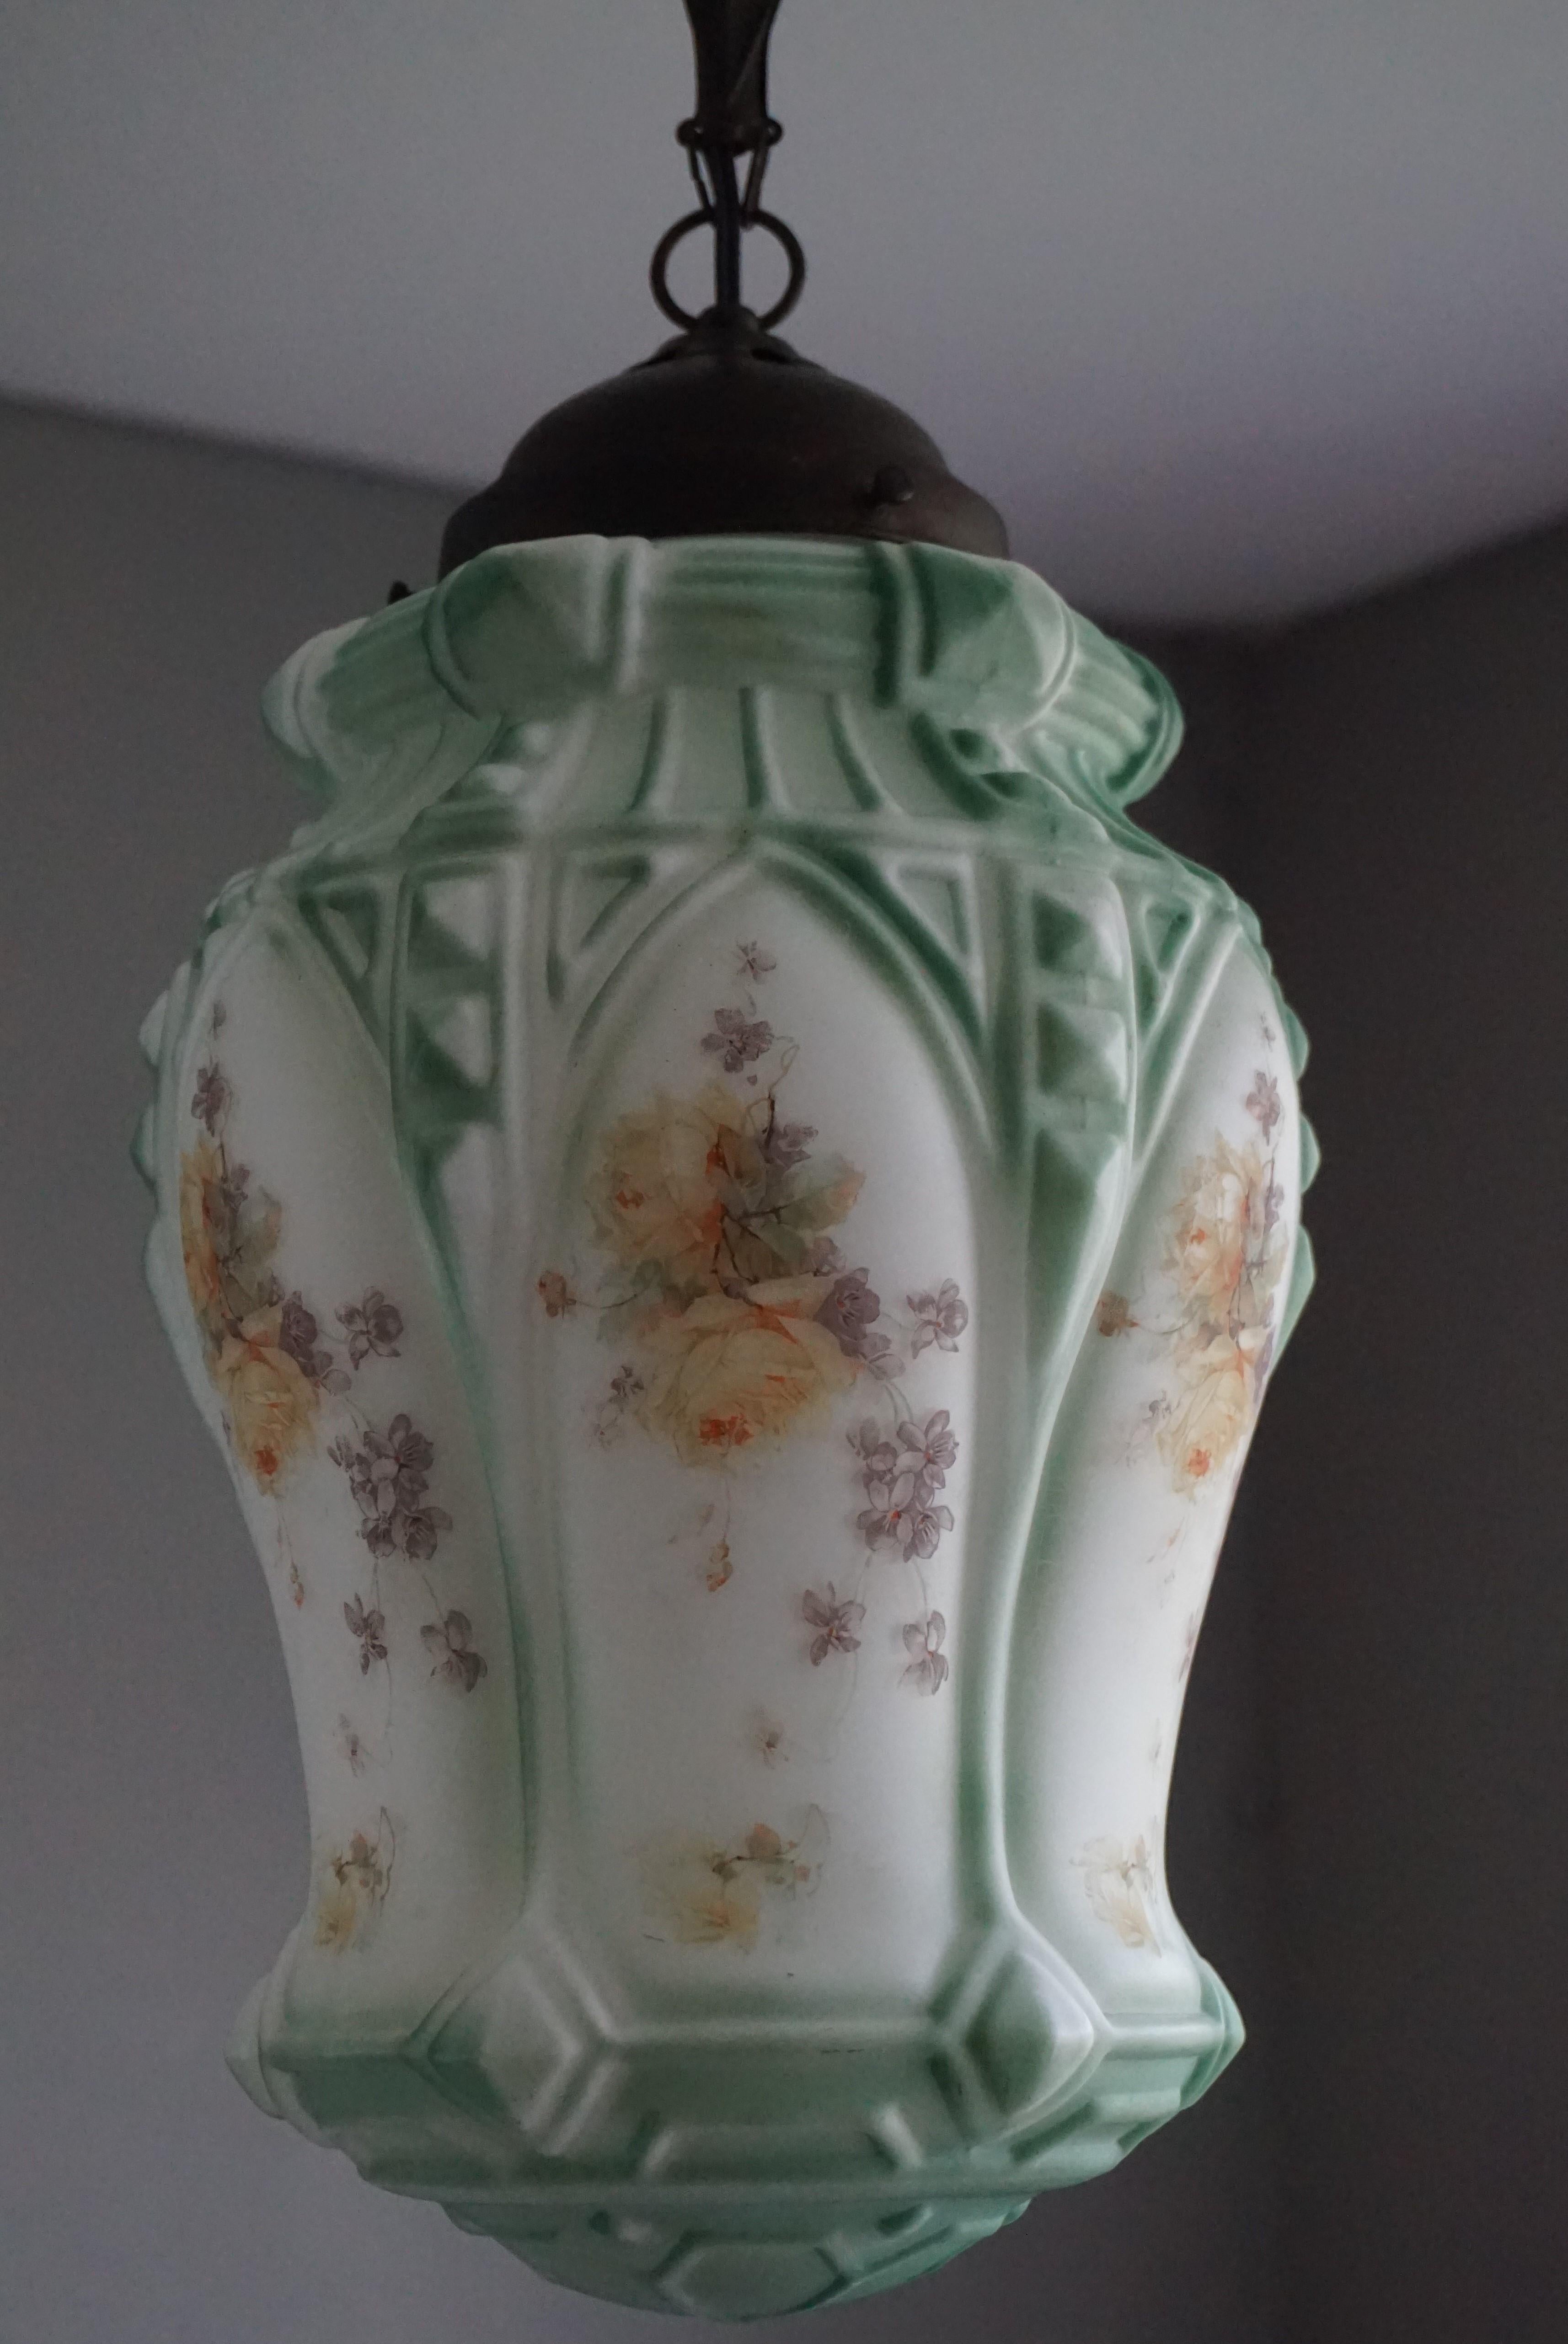 English Arts & Crafts Flowers Decorated Opaline Glass Pendant / Light Fixture (Arts and Crafts)